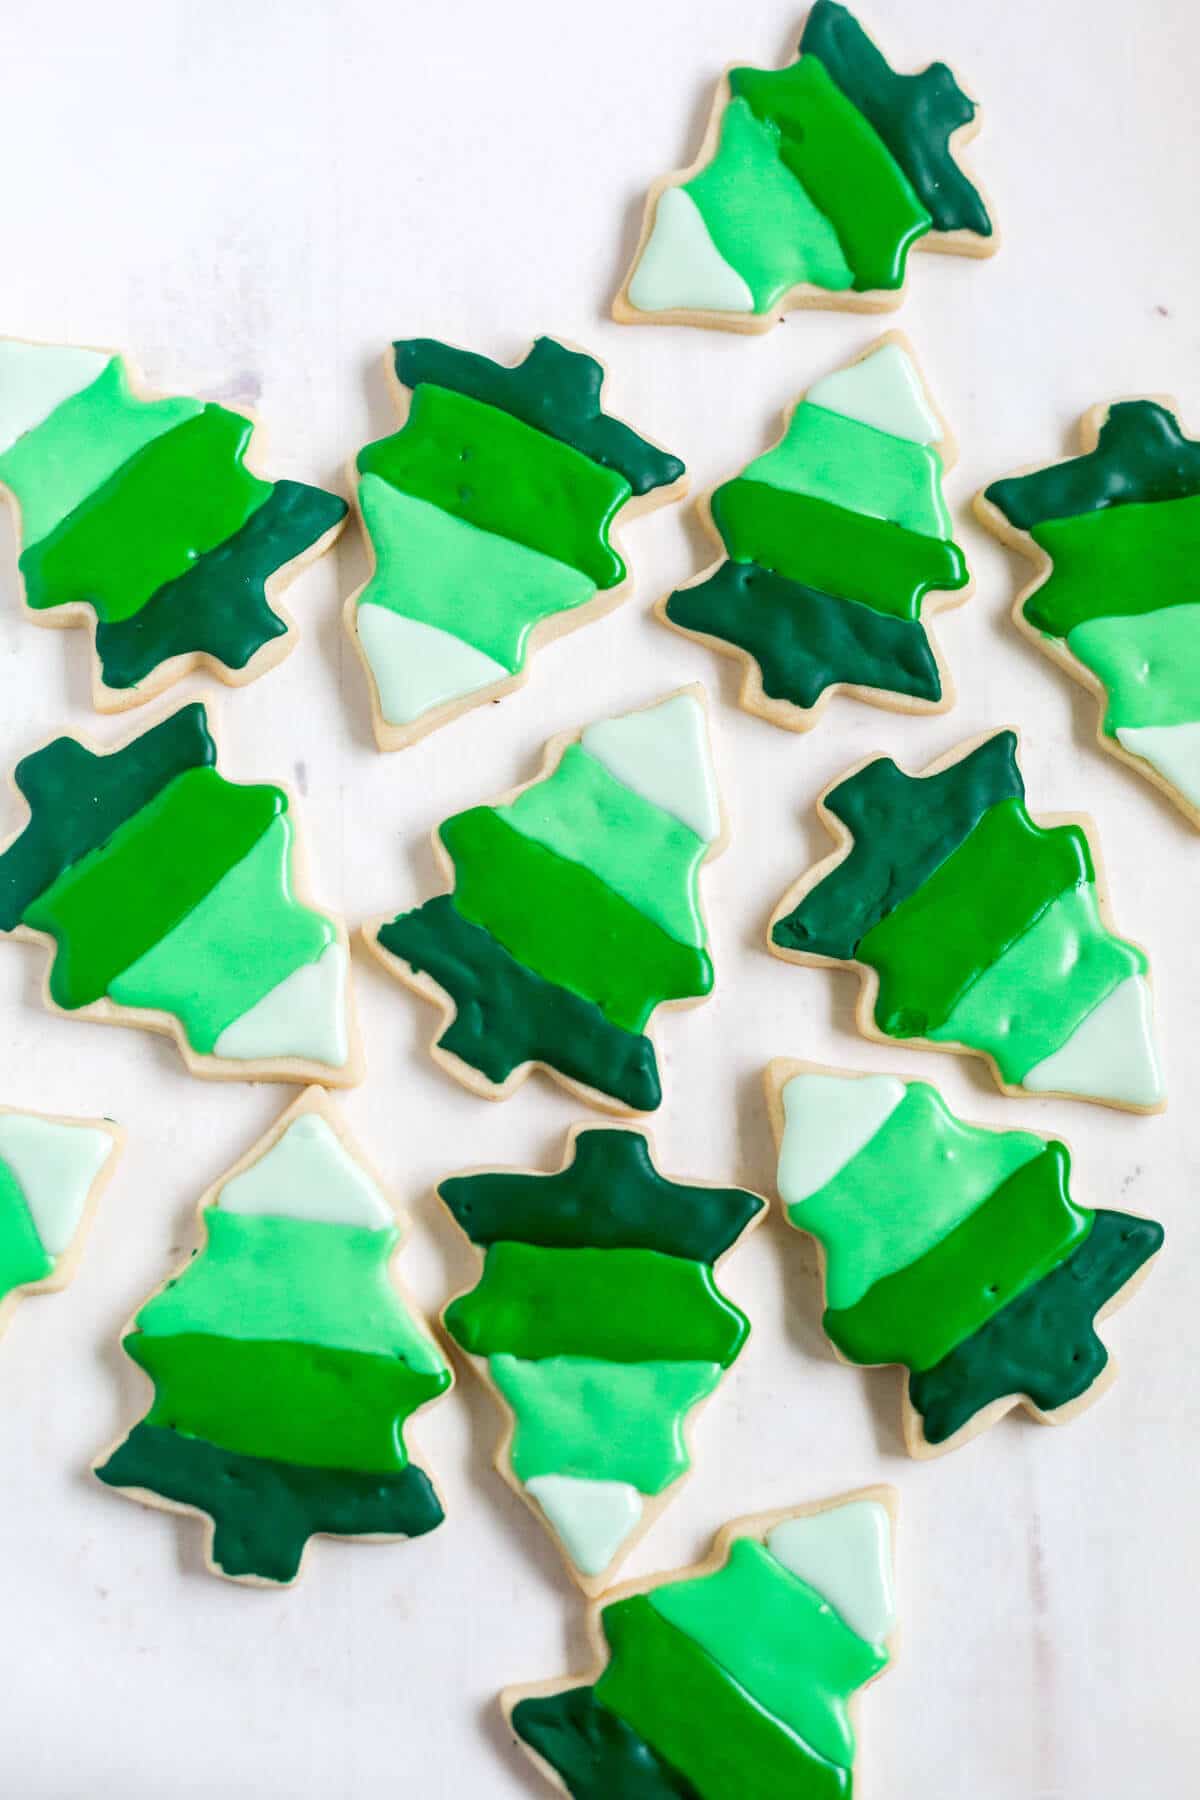 These Christmas tree cookies are decorated with 4 colors of royal icing to create an ombre effect! With different shades of green you’ll get a fun, festive and impressive cookie to add to the list of Christmas cookies.